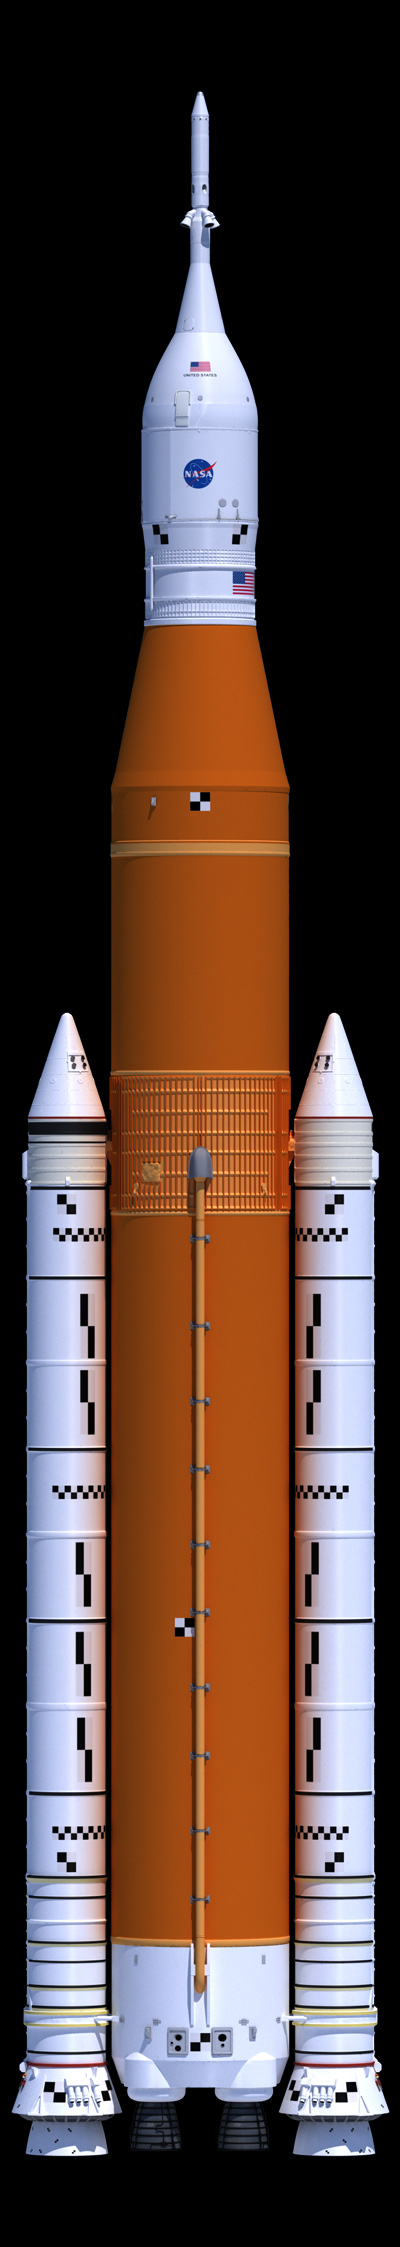 space launch system side view